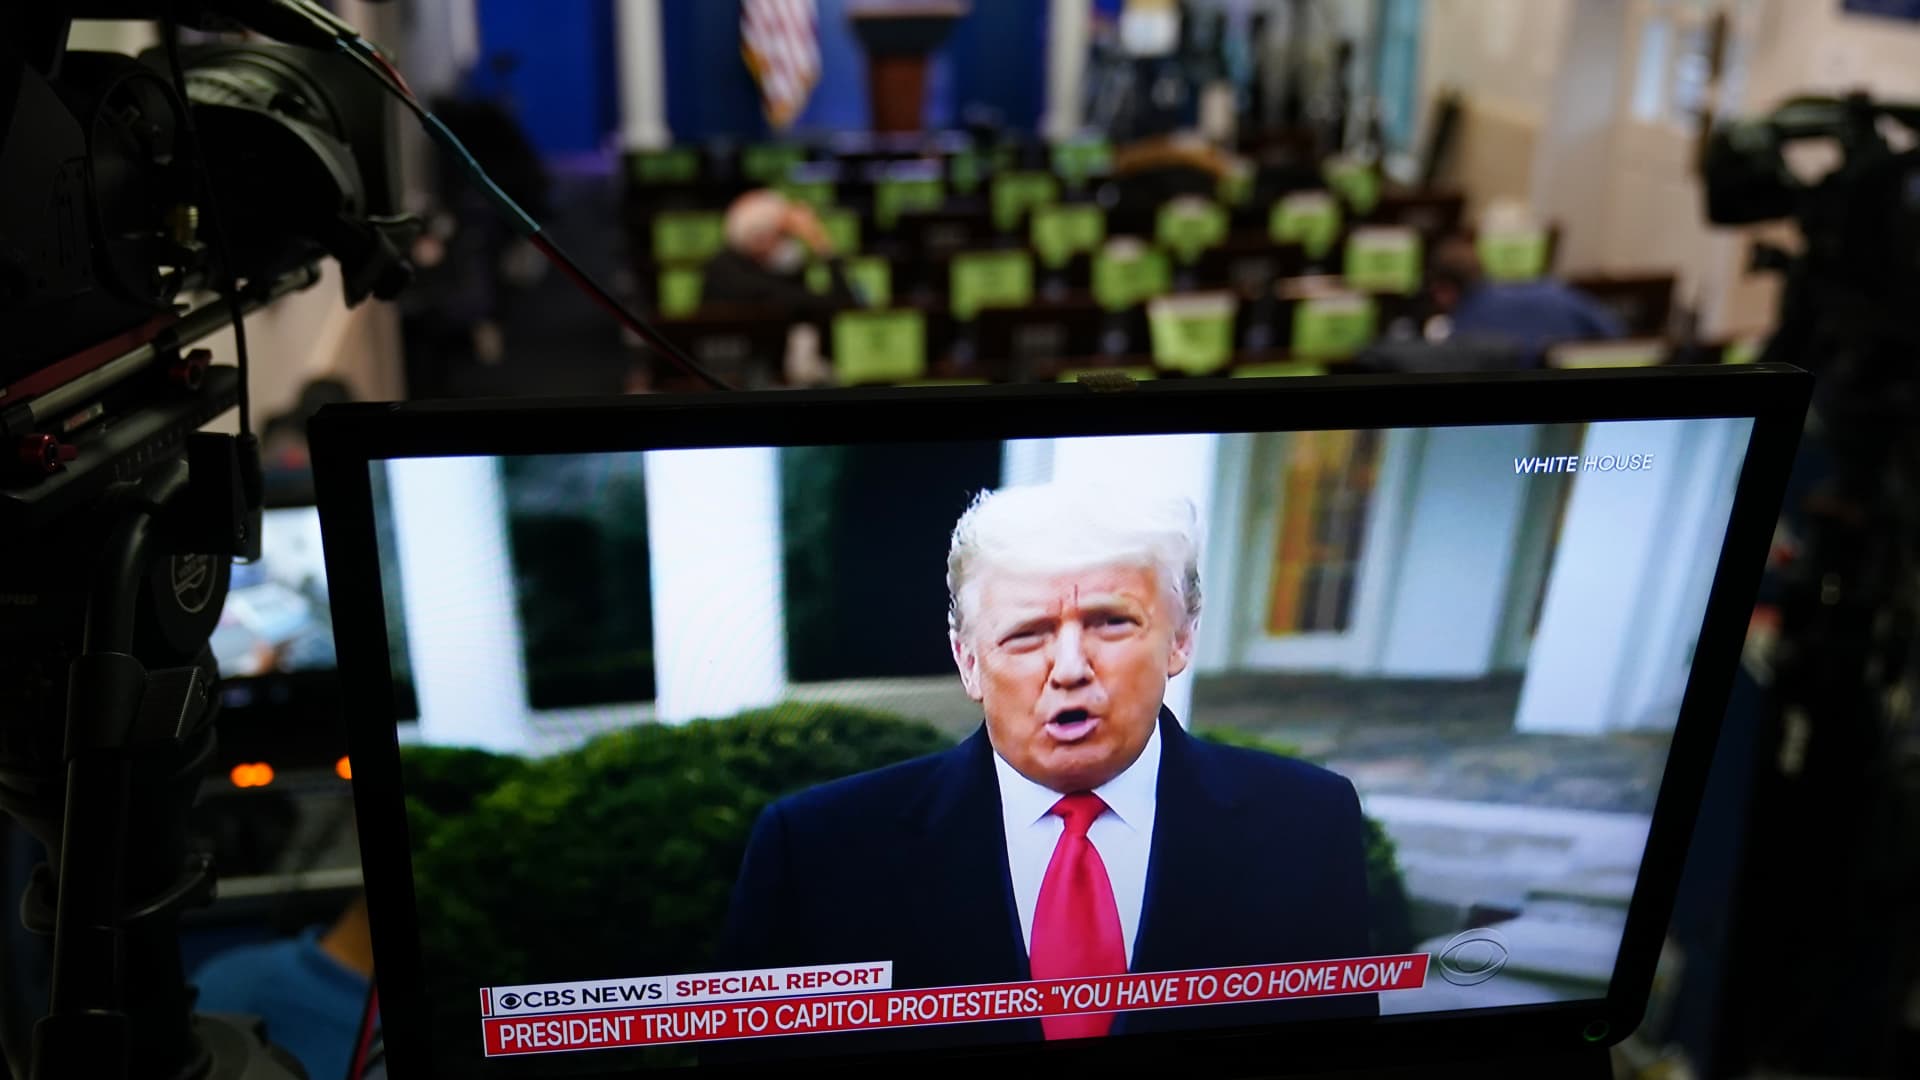 US President Donald Trump is seen on TV from a video message released on Twitter, seen in an empty Brady Briefing Room at the White House in Washington, DC on January 6, 2020.